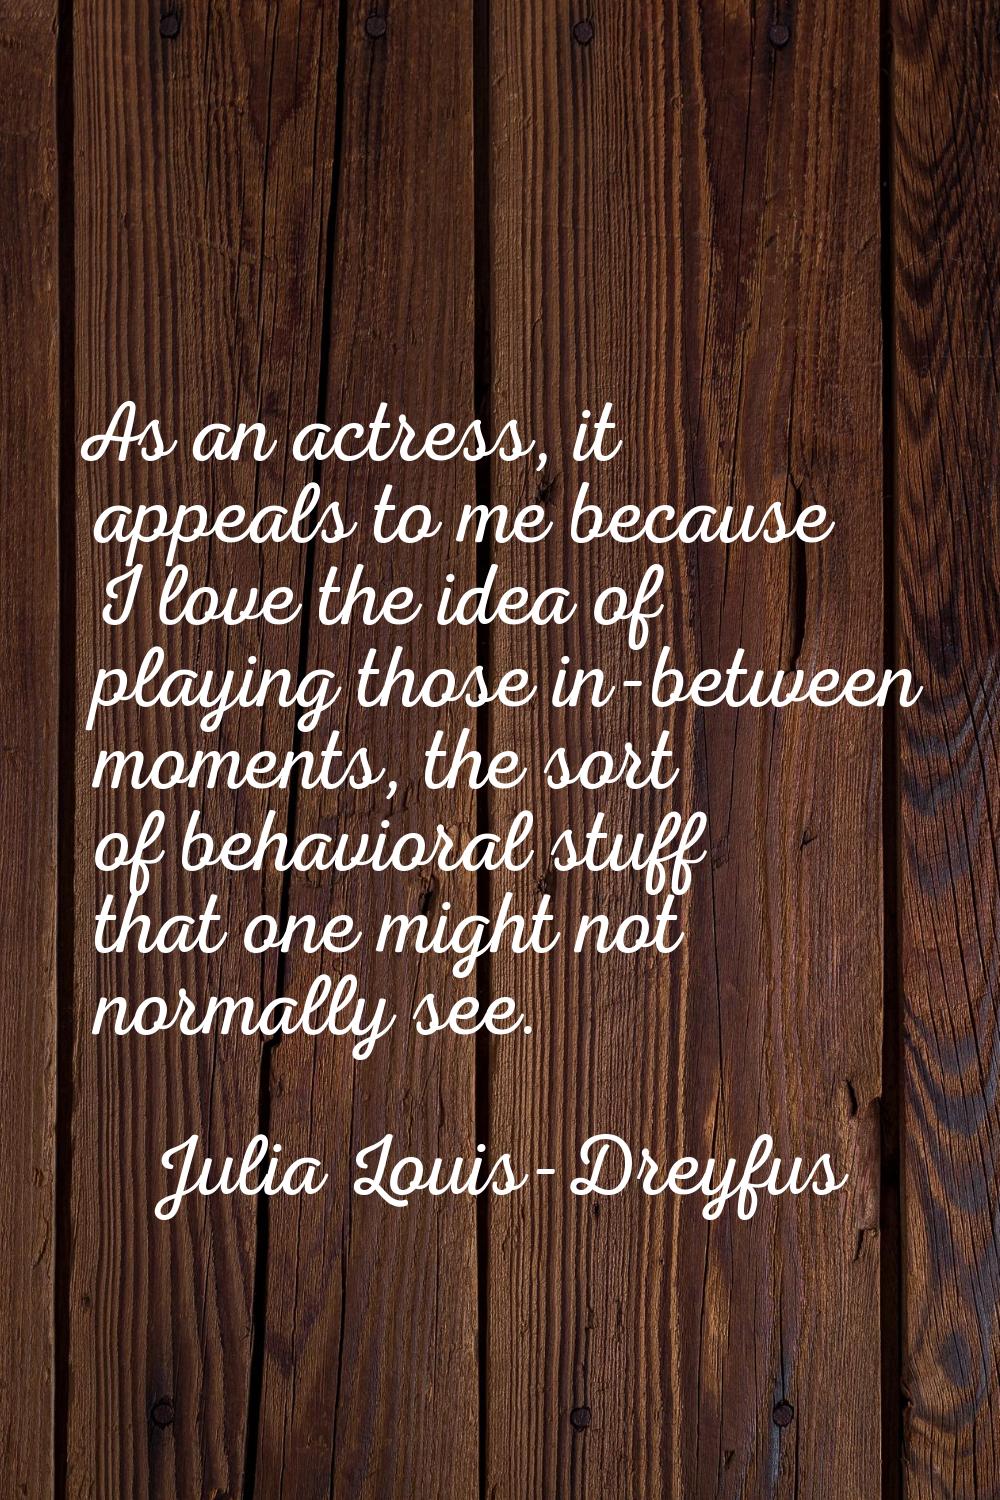 As an actress, it appeals to me because I love the idea of playing those in-between moments, the so